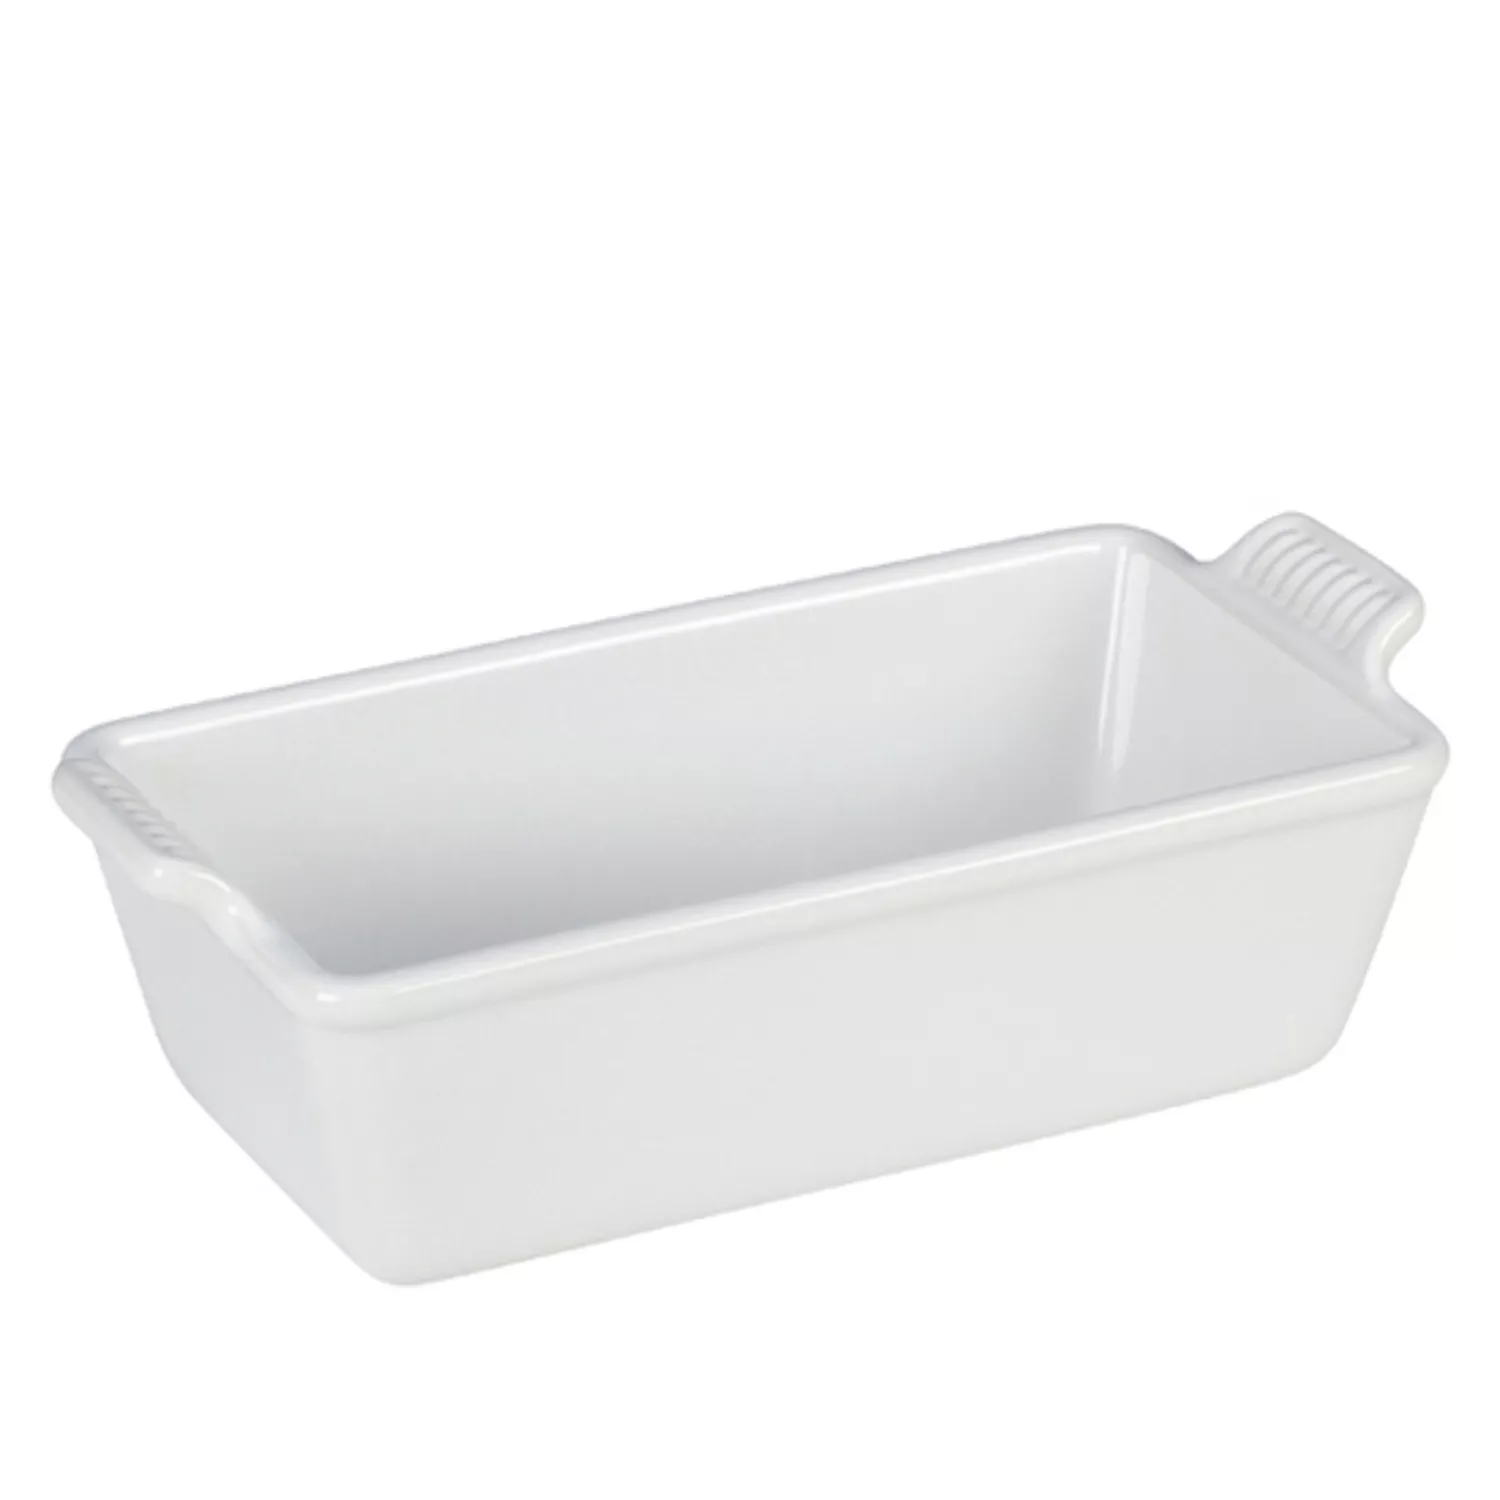 Stoneware LOAF PAN SET - household items - by owner - housewares